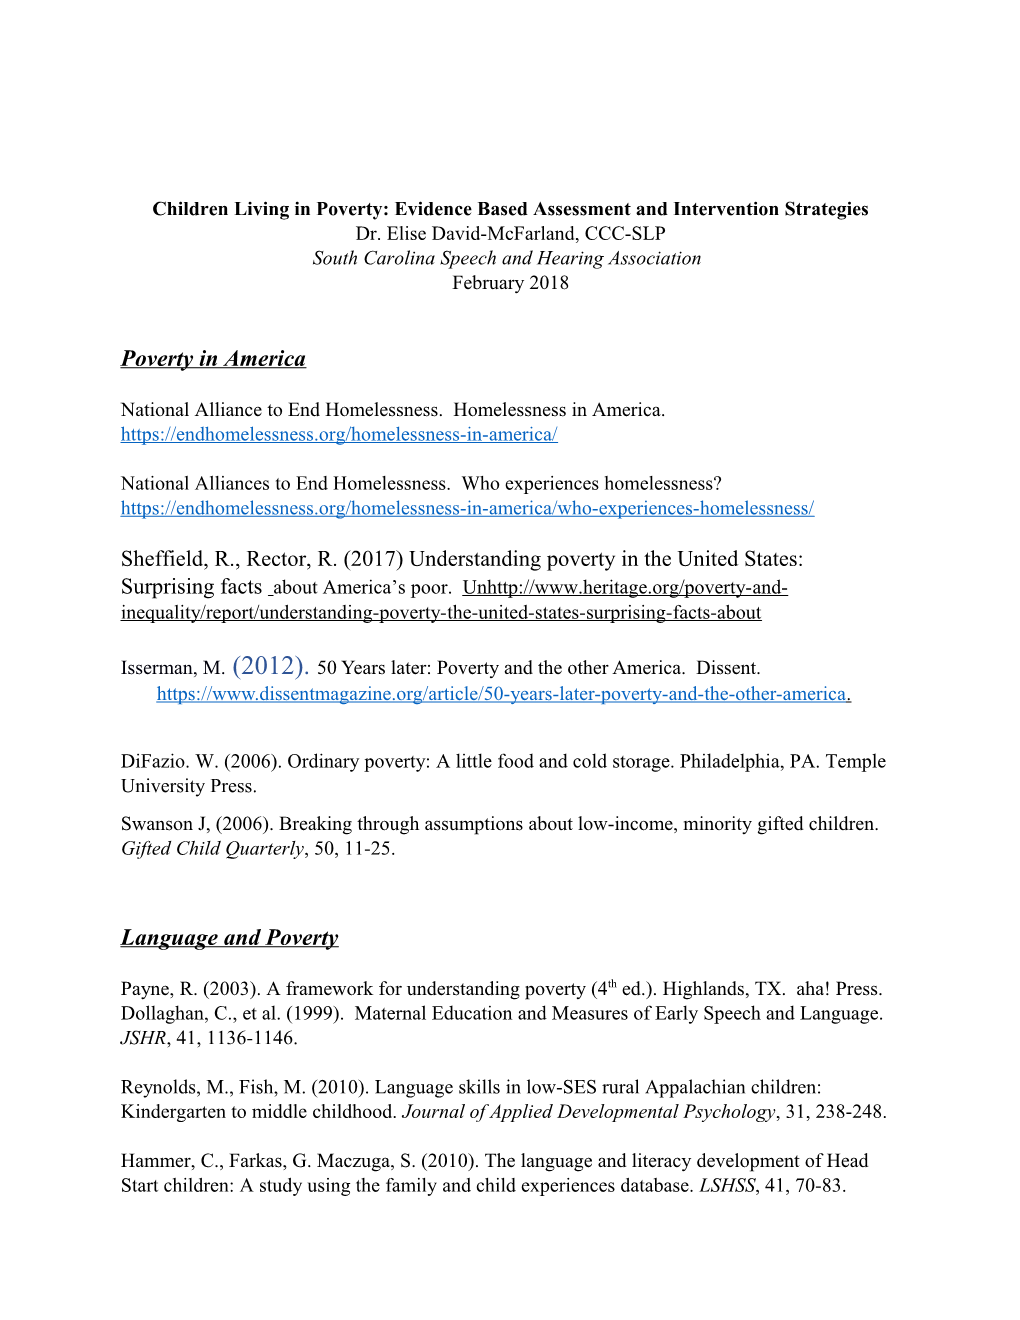 Children Living in Poverty: Evidence Based Assessment and Intervention Strategies